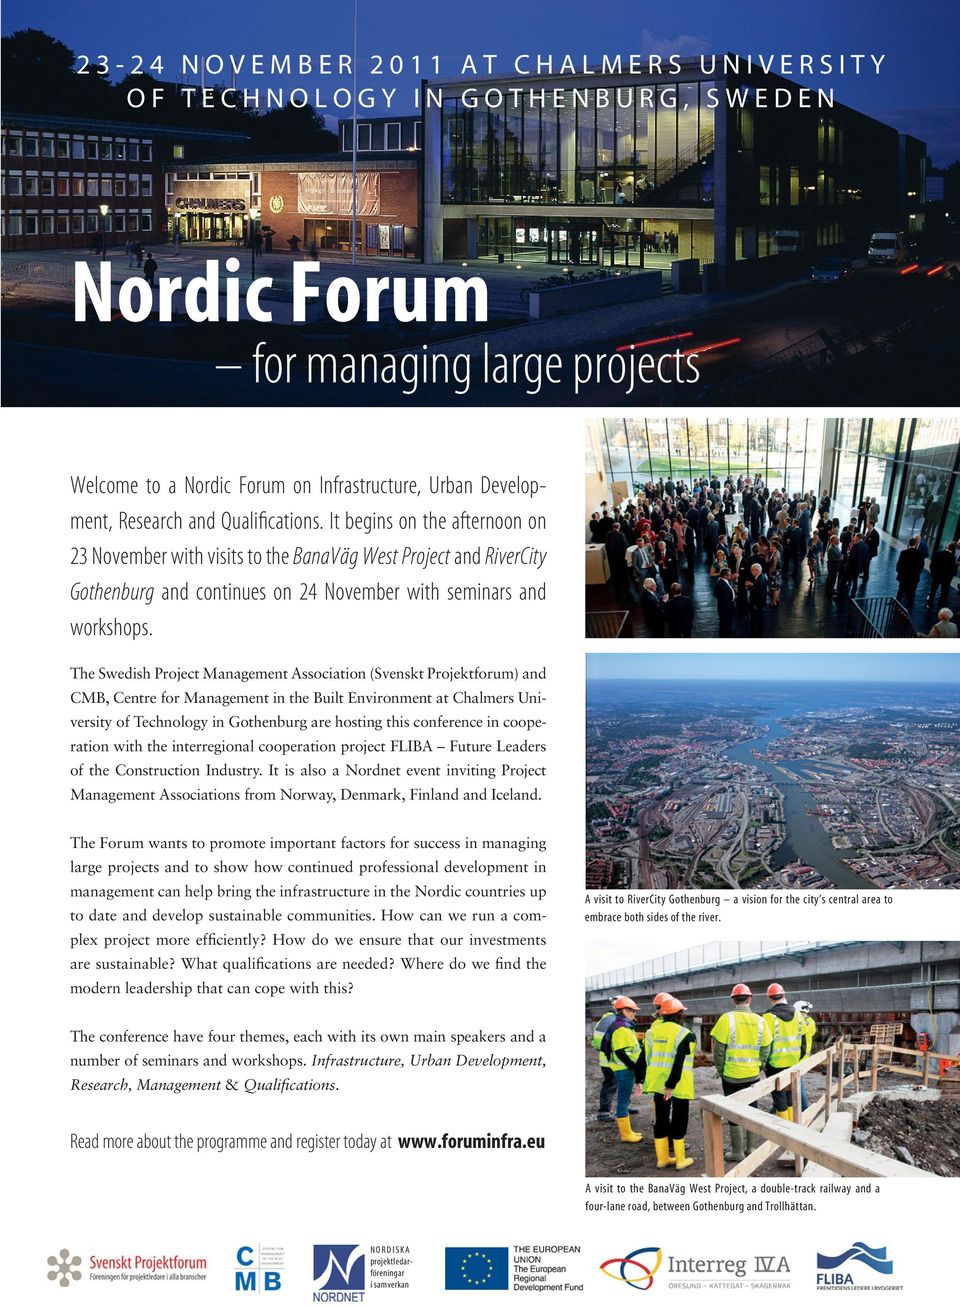 The Swedish Project Management Association (Svenskt Projektforum) and CMB, Centre for Management in the Built Environment at Chalmers University of Technology in Gothenburg are hosting this